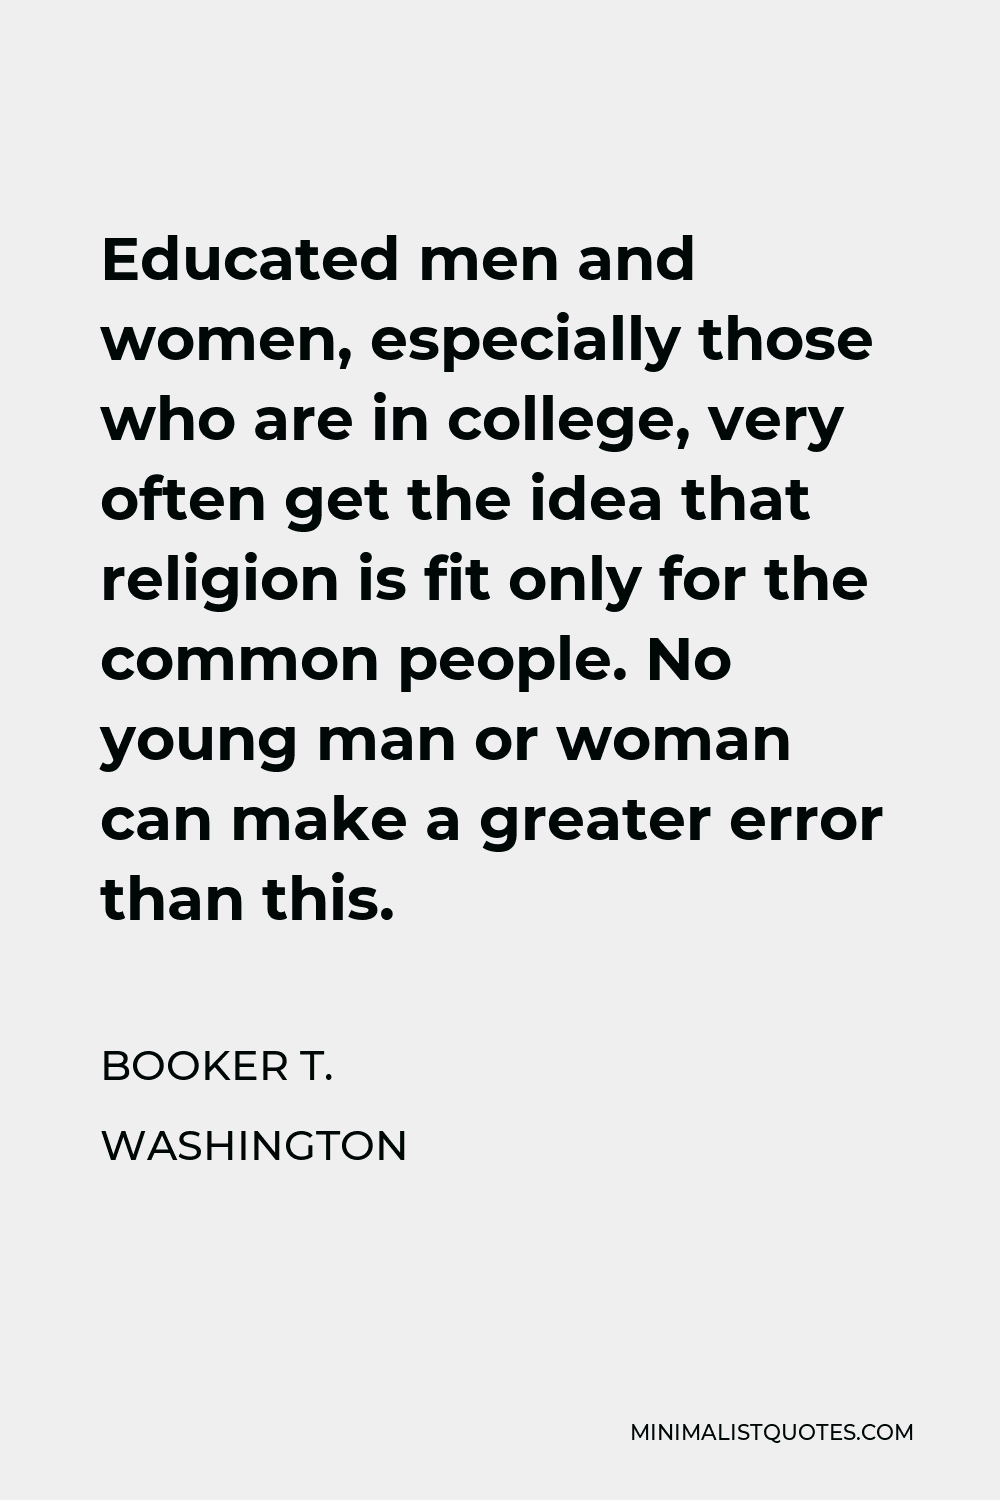 Booker T. Washington Quote - Educated men and women, especially those who are in college, very often get the idea that religion is fit only for the common people. No young man or woman can make a greater error than this.